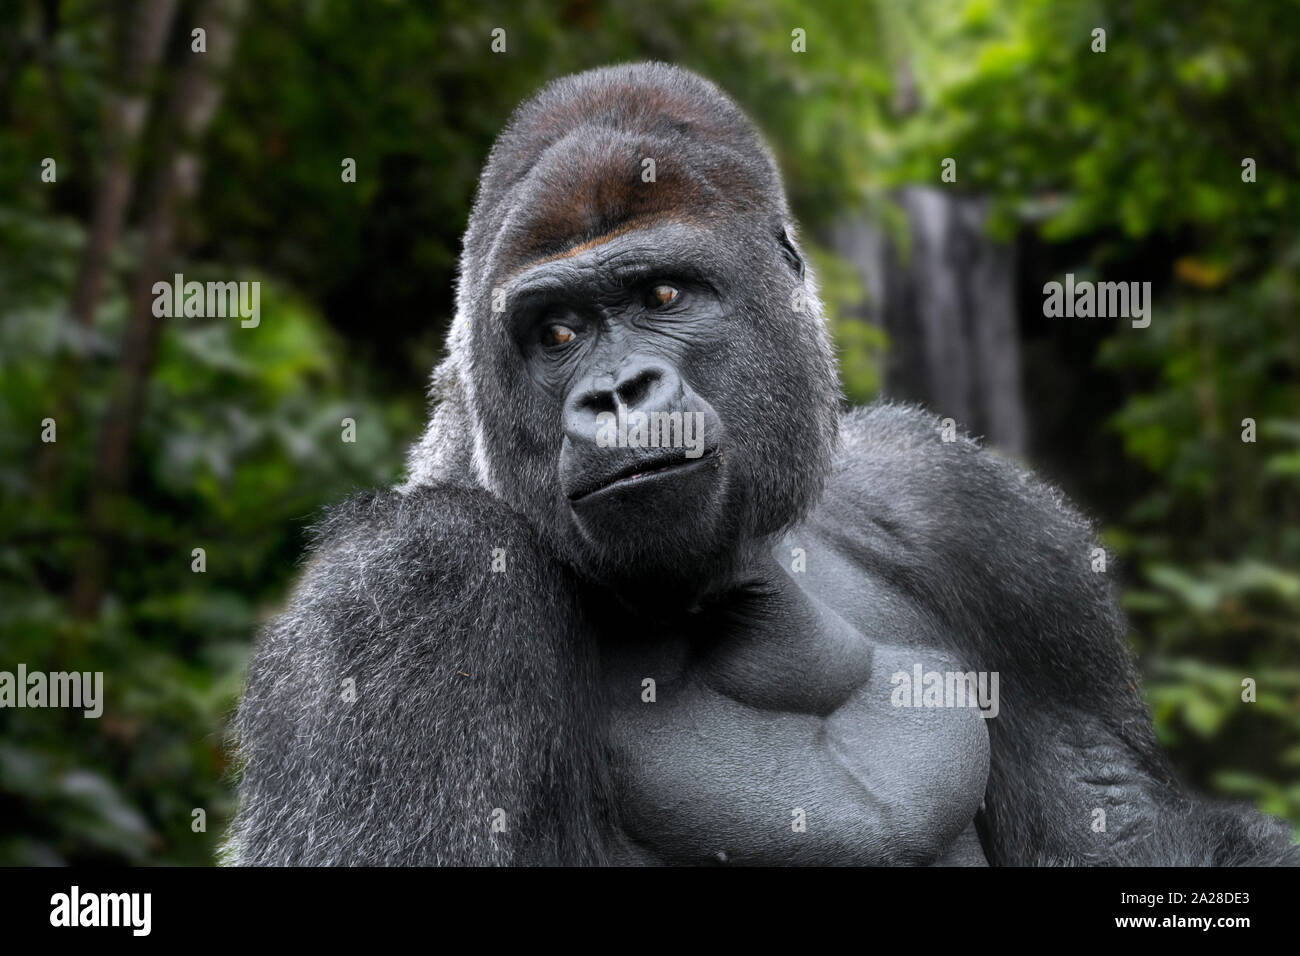 Western lowland gorilla (Gorilla gorilla gorilla) male silverback native to tropical rain forest in Central Africa (Digital composite) Stock Photo